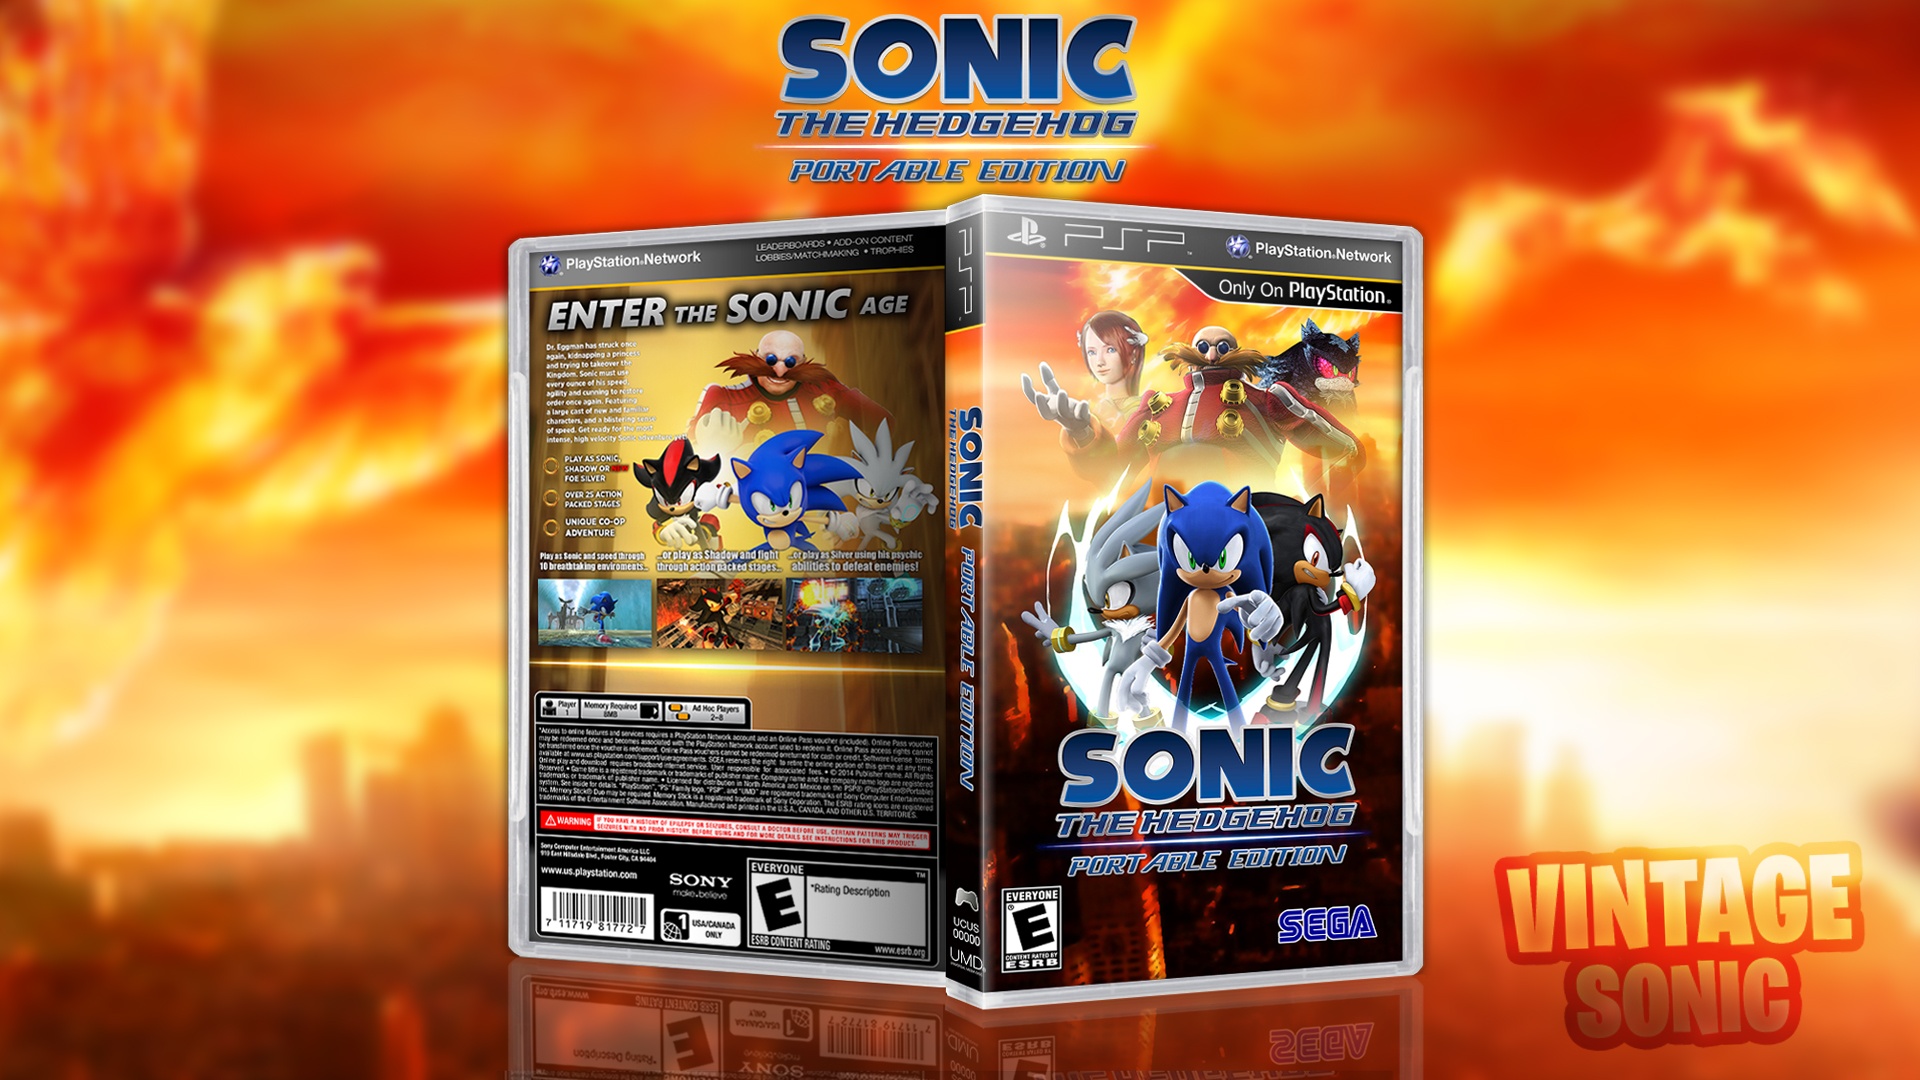 Sonic The Hedgehog Portable Edition box cover